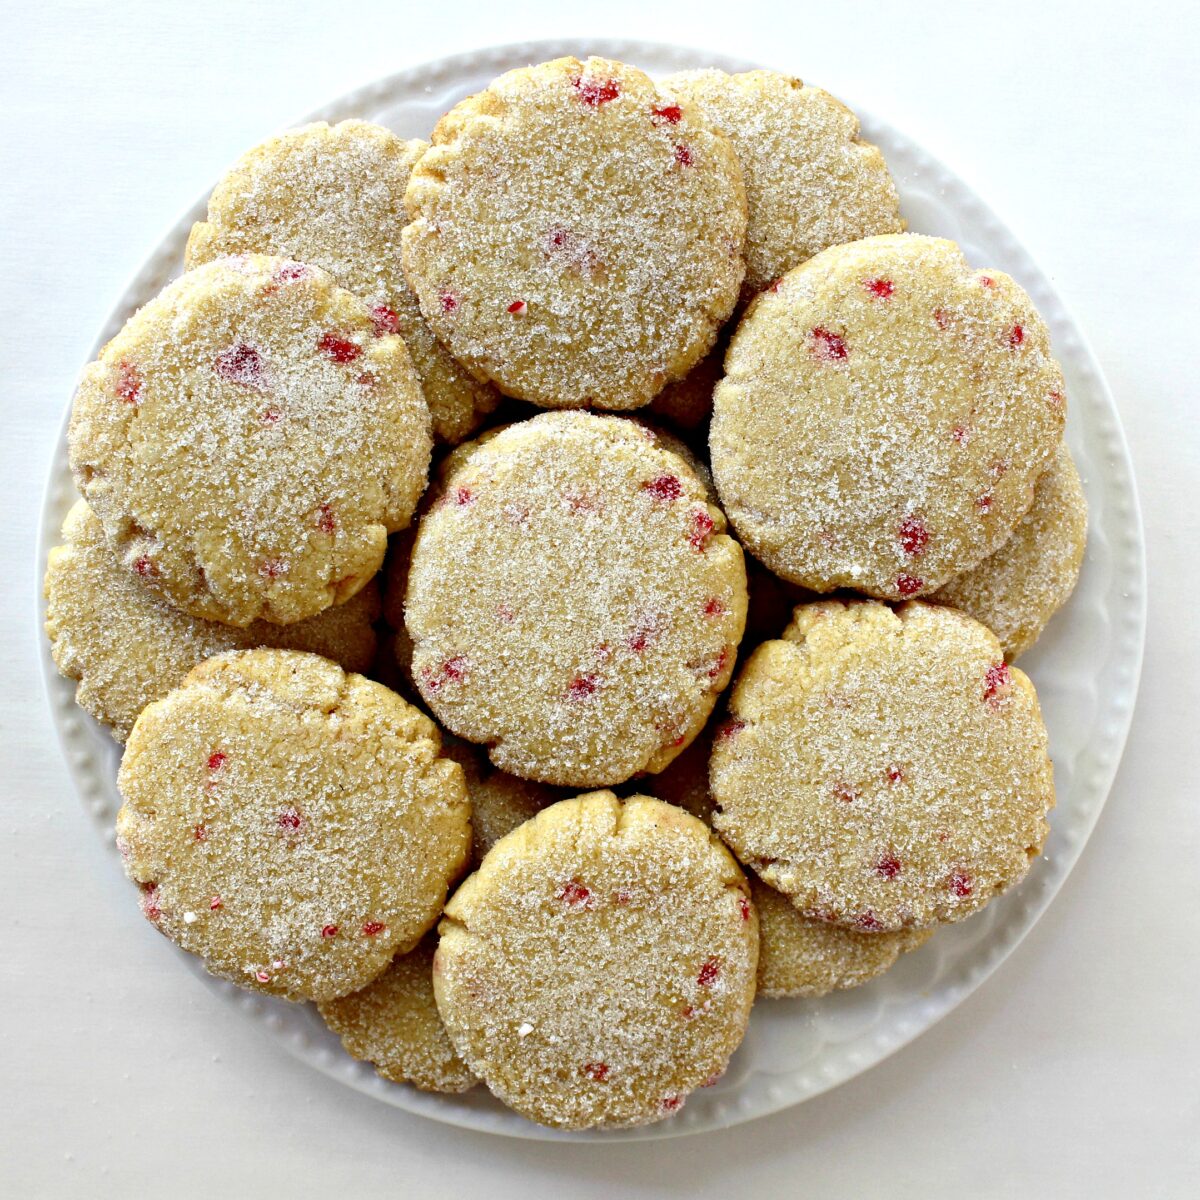 Disc shaped lemon cookies with bits of peppermint showing in the dough, topped with sugar.